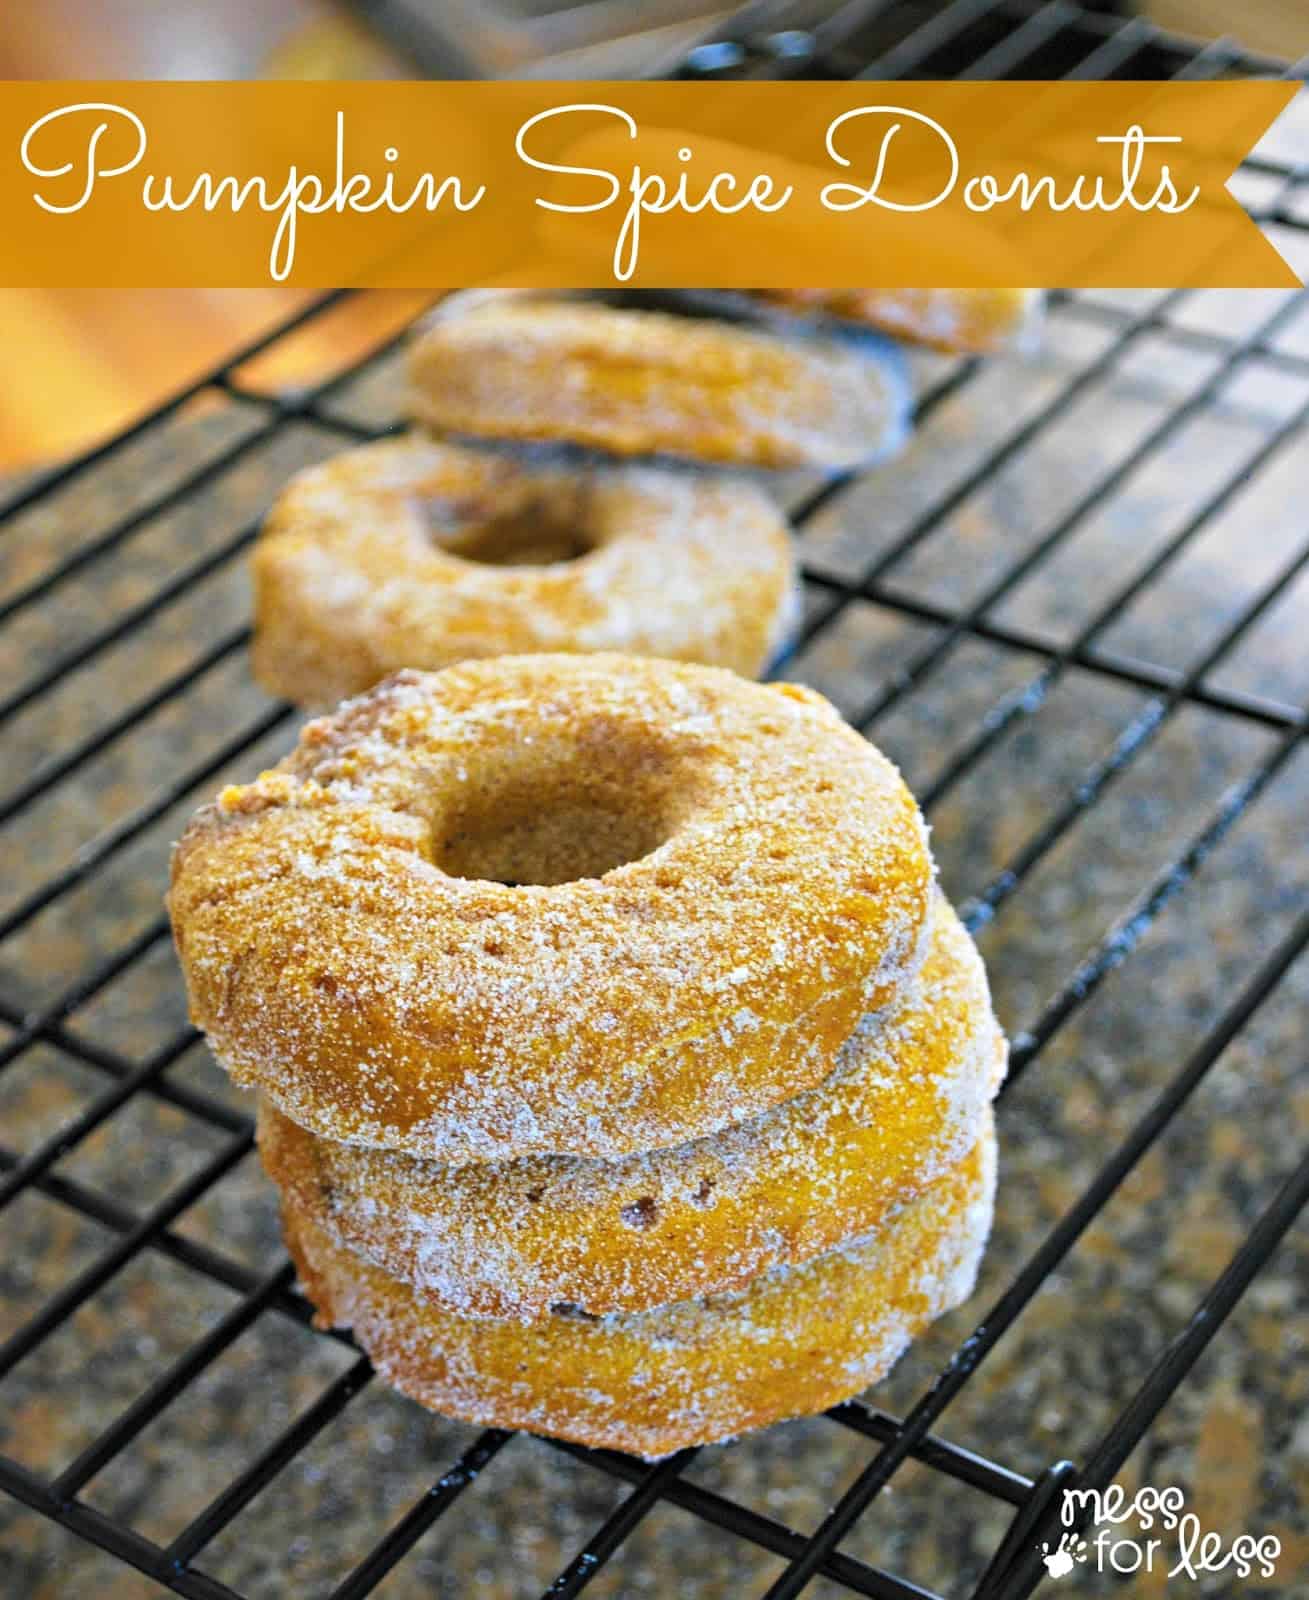 Pumpkin Donut Recipe - The perfect Fall treat! The baked donuts are healthier than fried and have a delicious pumpkin flavor!